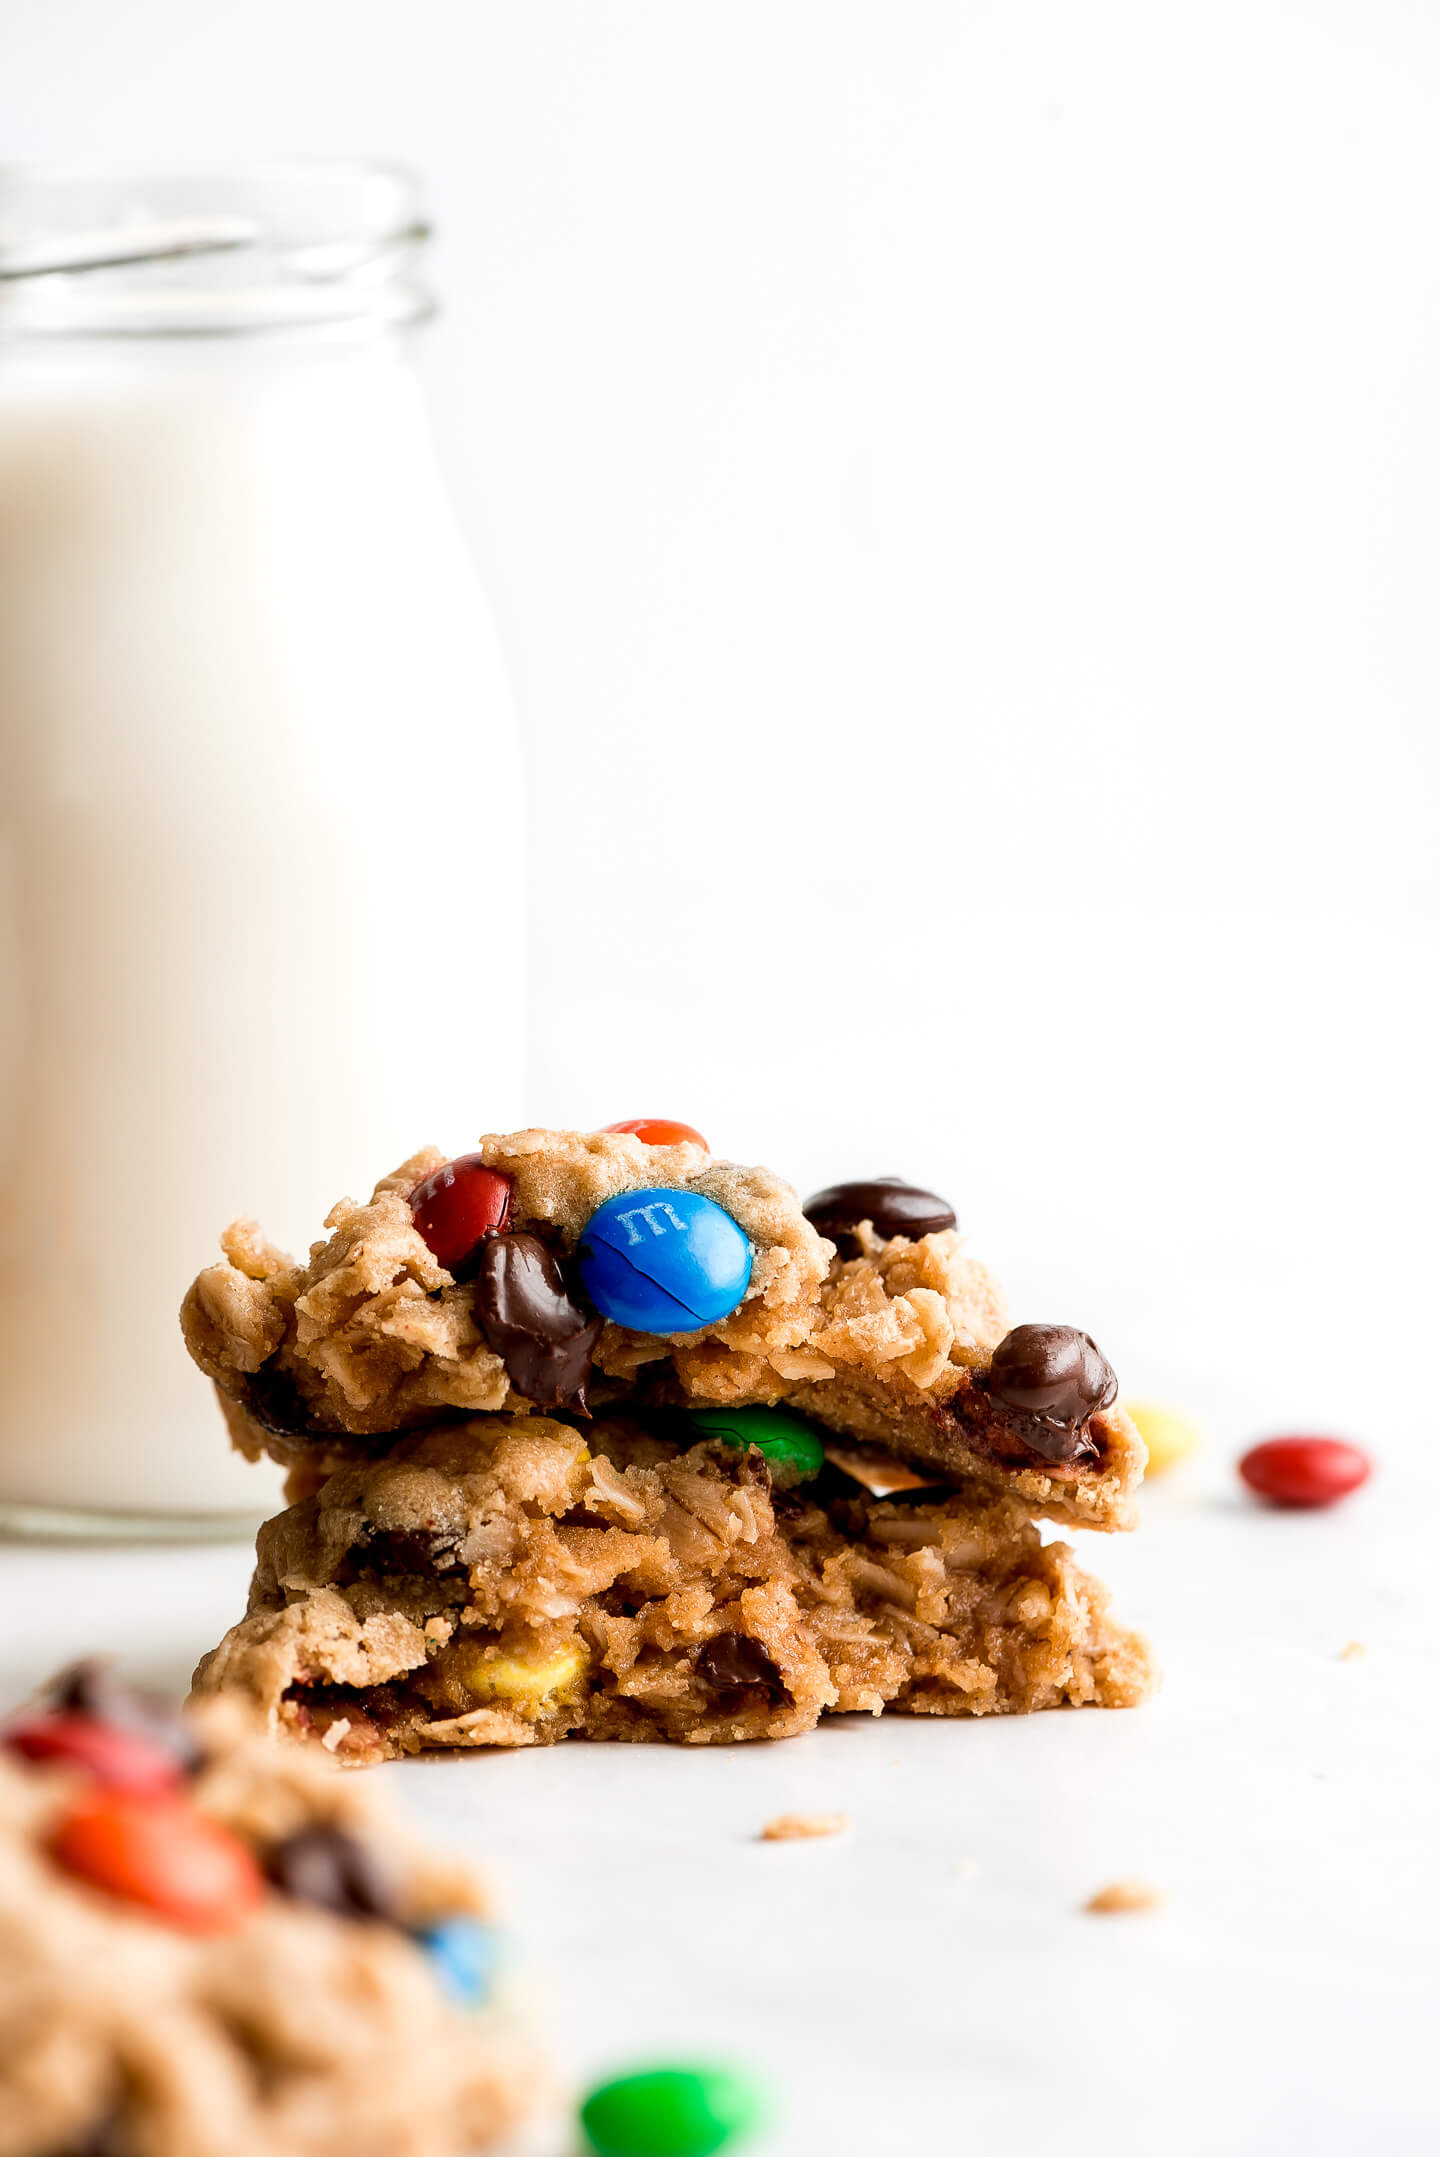 Two halves of a cookie with m&m's and chocolate chips stacked on top of each other showing the chewy inside.